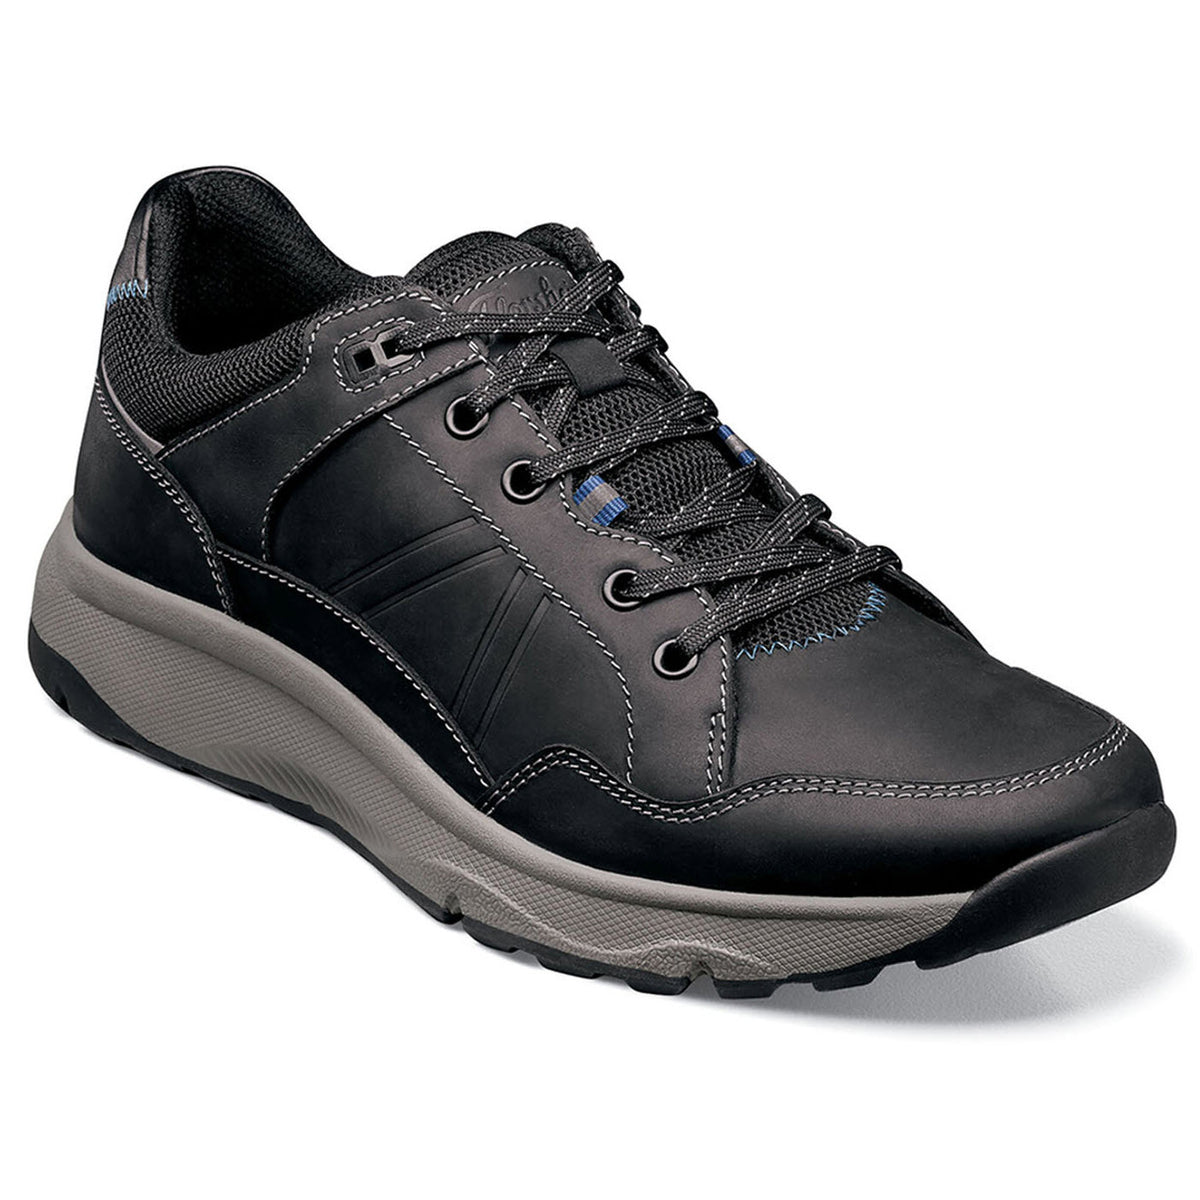 Florsheim hiking shoe with Comfortech footbed on a white background.